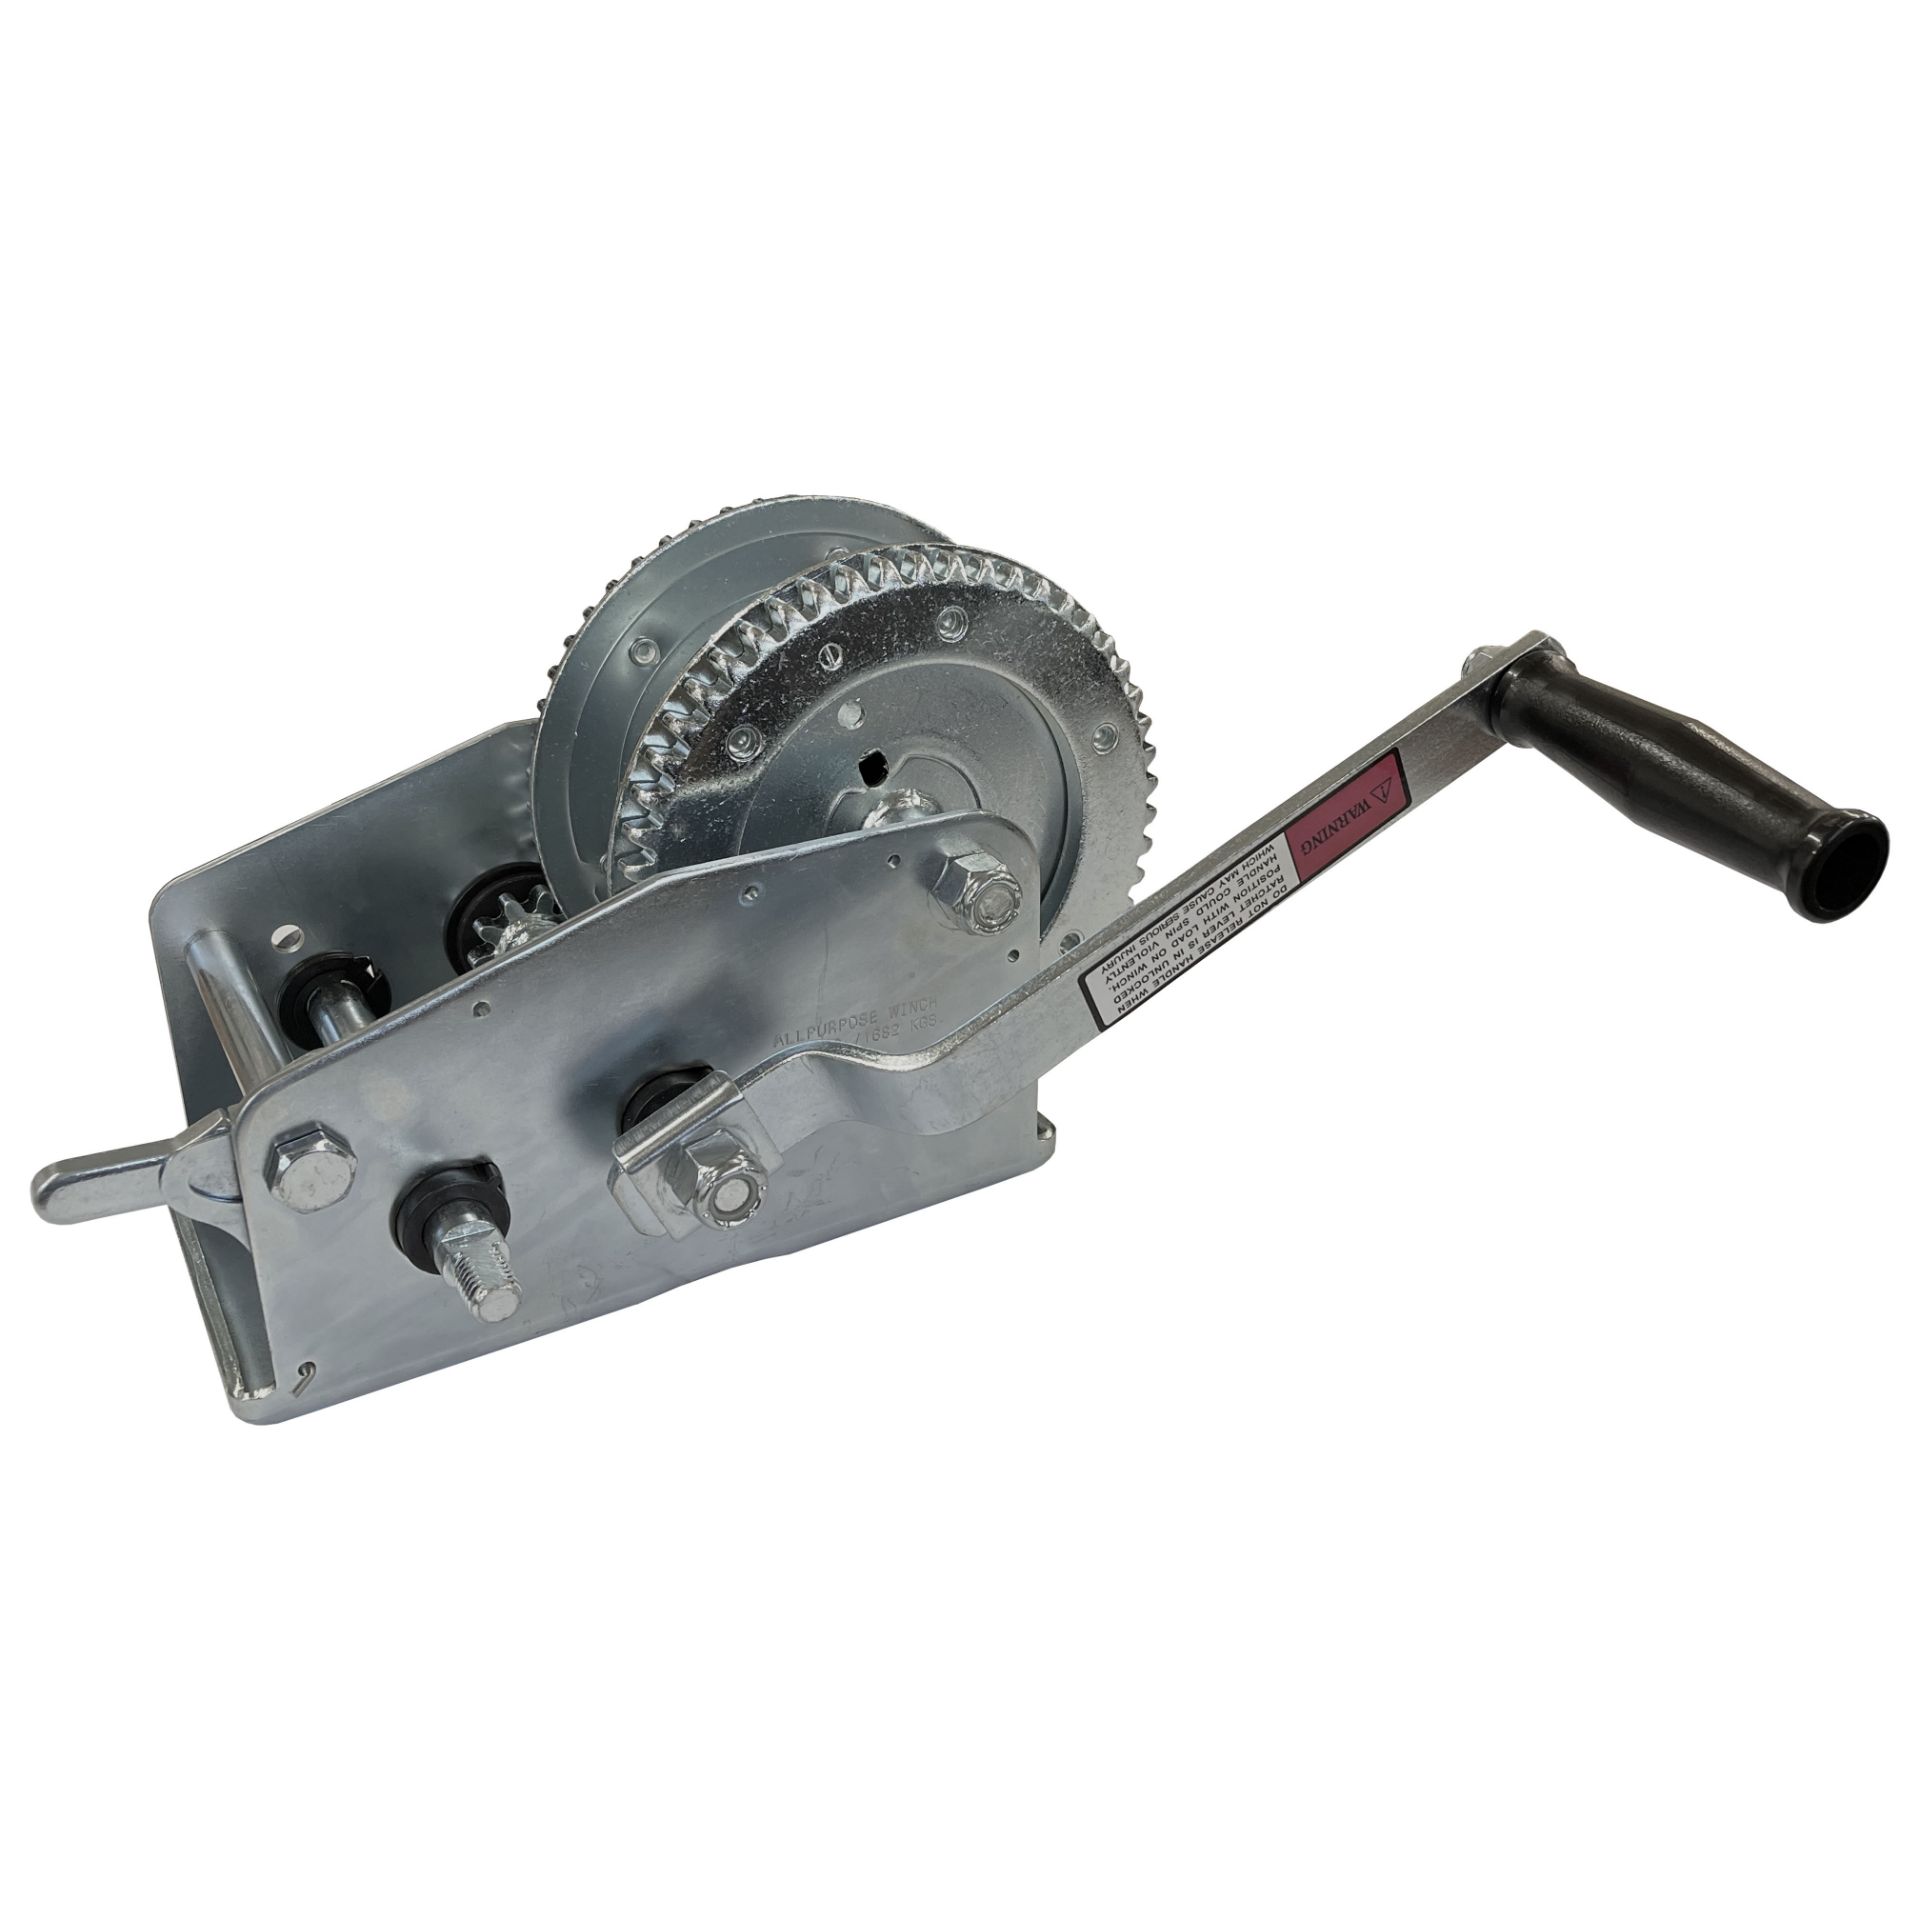 6 X 1400Lbs Zinc Plated Hand Winch (Not For Lifting) (Hw14)